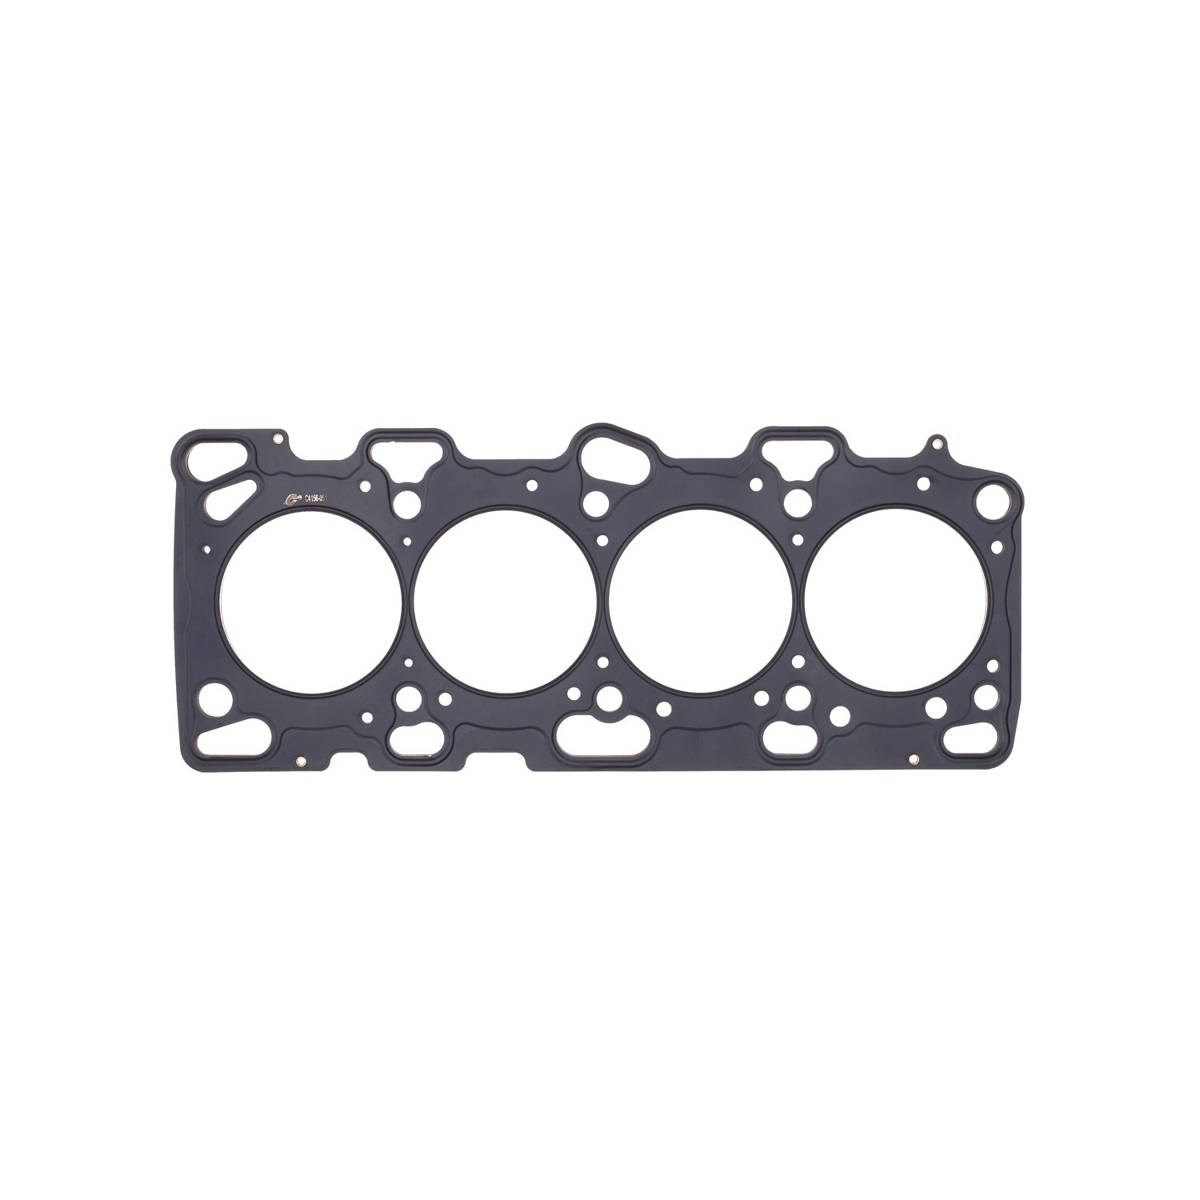 Cylinder Head Gasket Mitsubishi 4G63T .036" MLS , 86mm Bore, DOHC, Evo 4-8 ONLY Cometic C4156-036